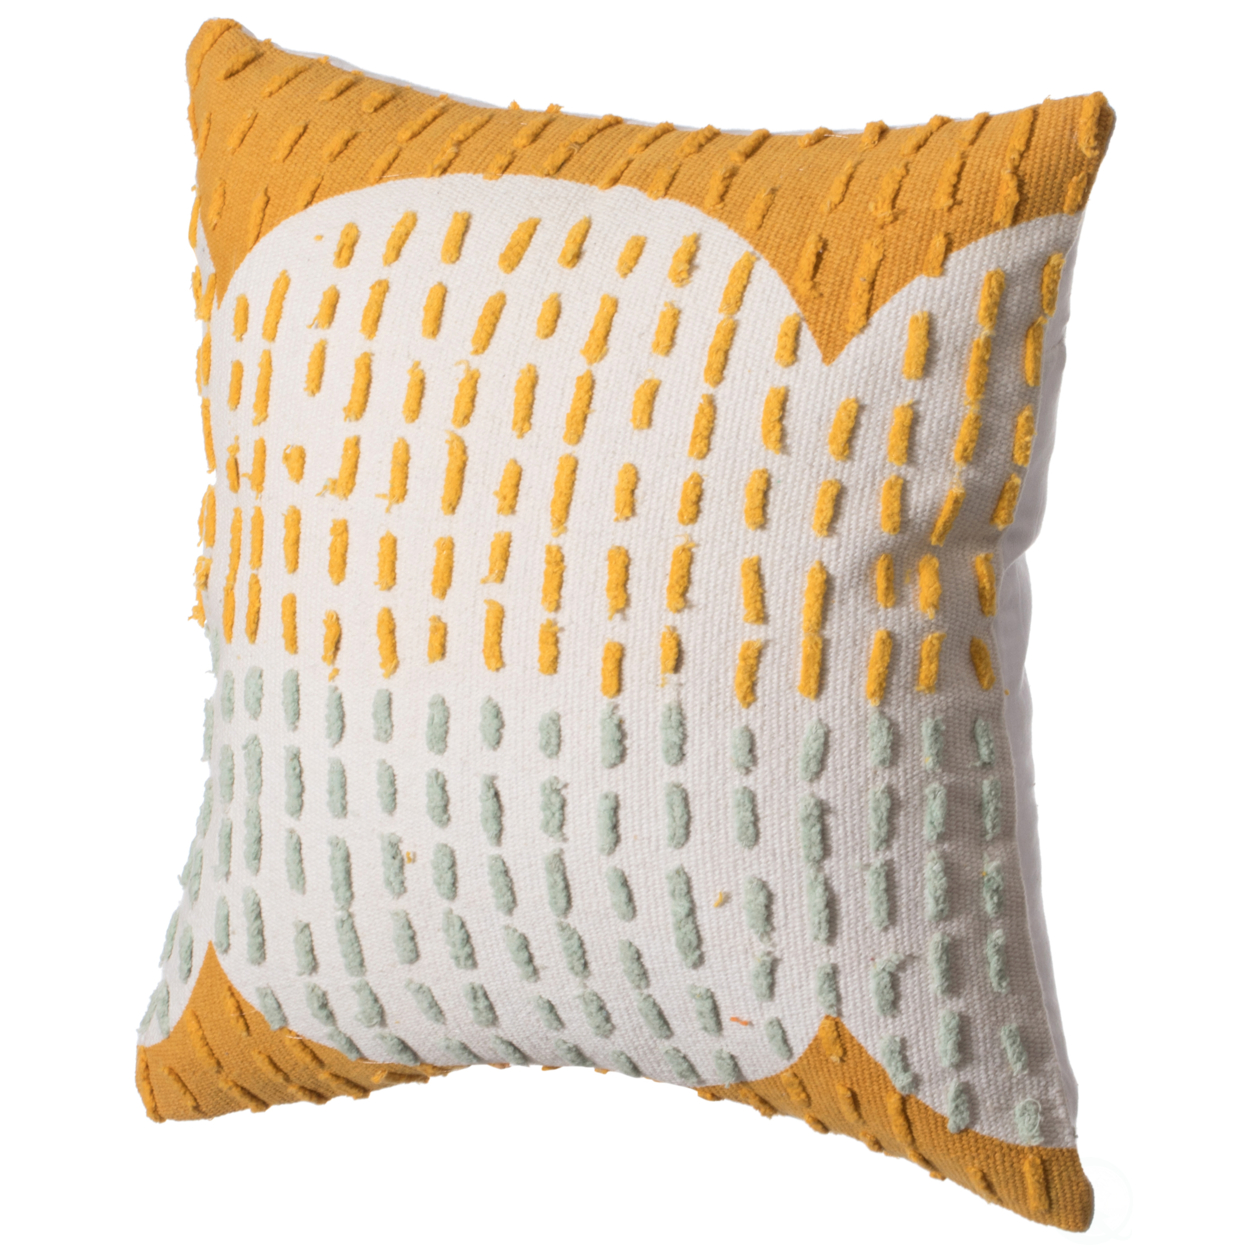 16" Handwoven Cotton Throw Pillow Cover with Ribbed Line Dots and Wave Border - mustard - yellow